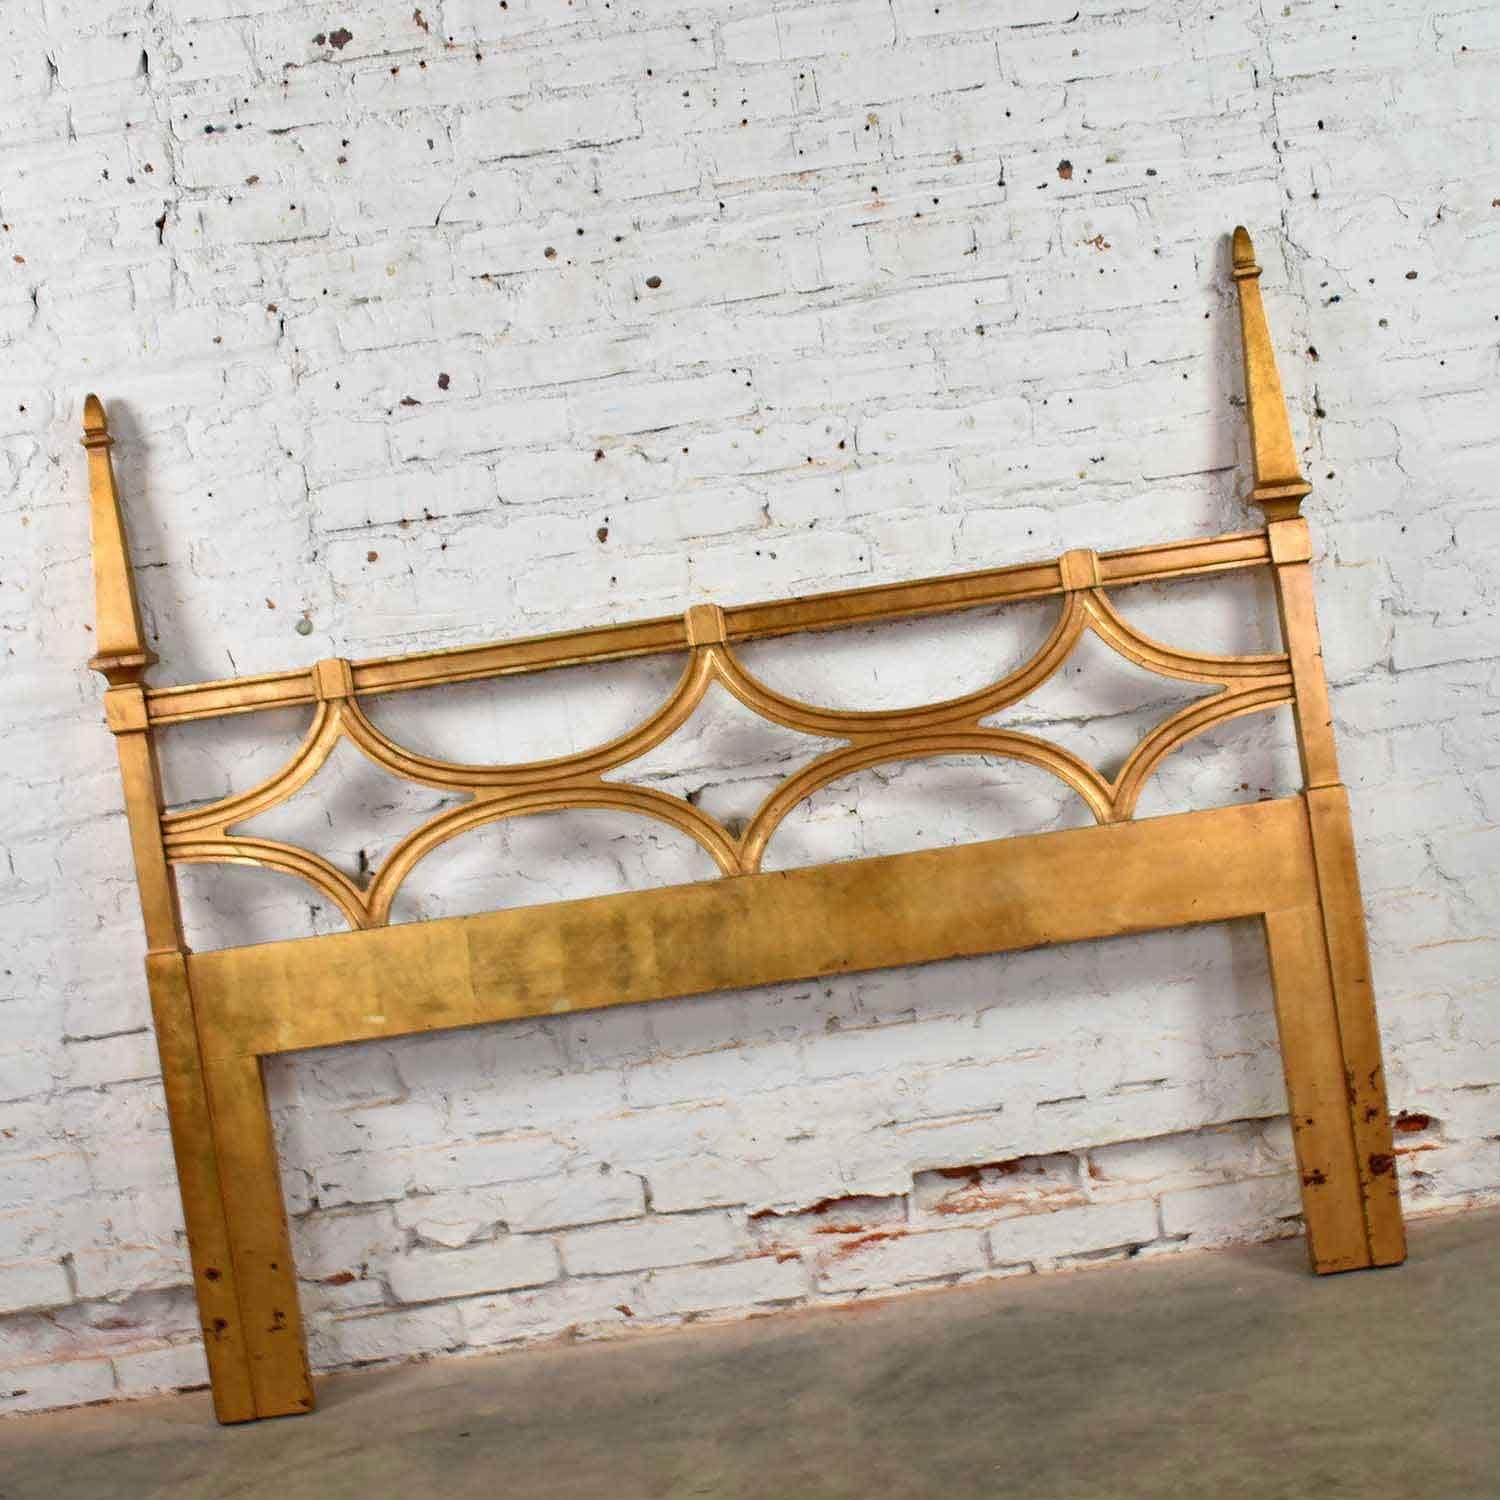 Gorgeous Hollywood Regency gold-leaf queen size headboard. It is in fabulous vintage condition with a nice age patina. Please see photos, circa 1960s-1970s.

Holy cow do we love gold leaf here at the shop! And this queen size Hollywood Regency